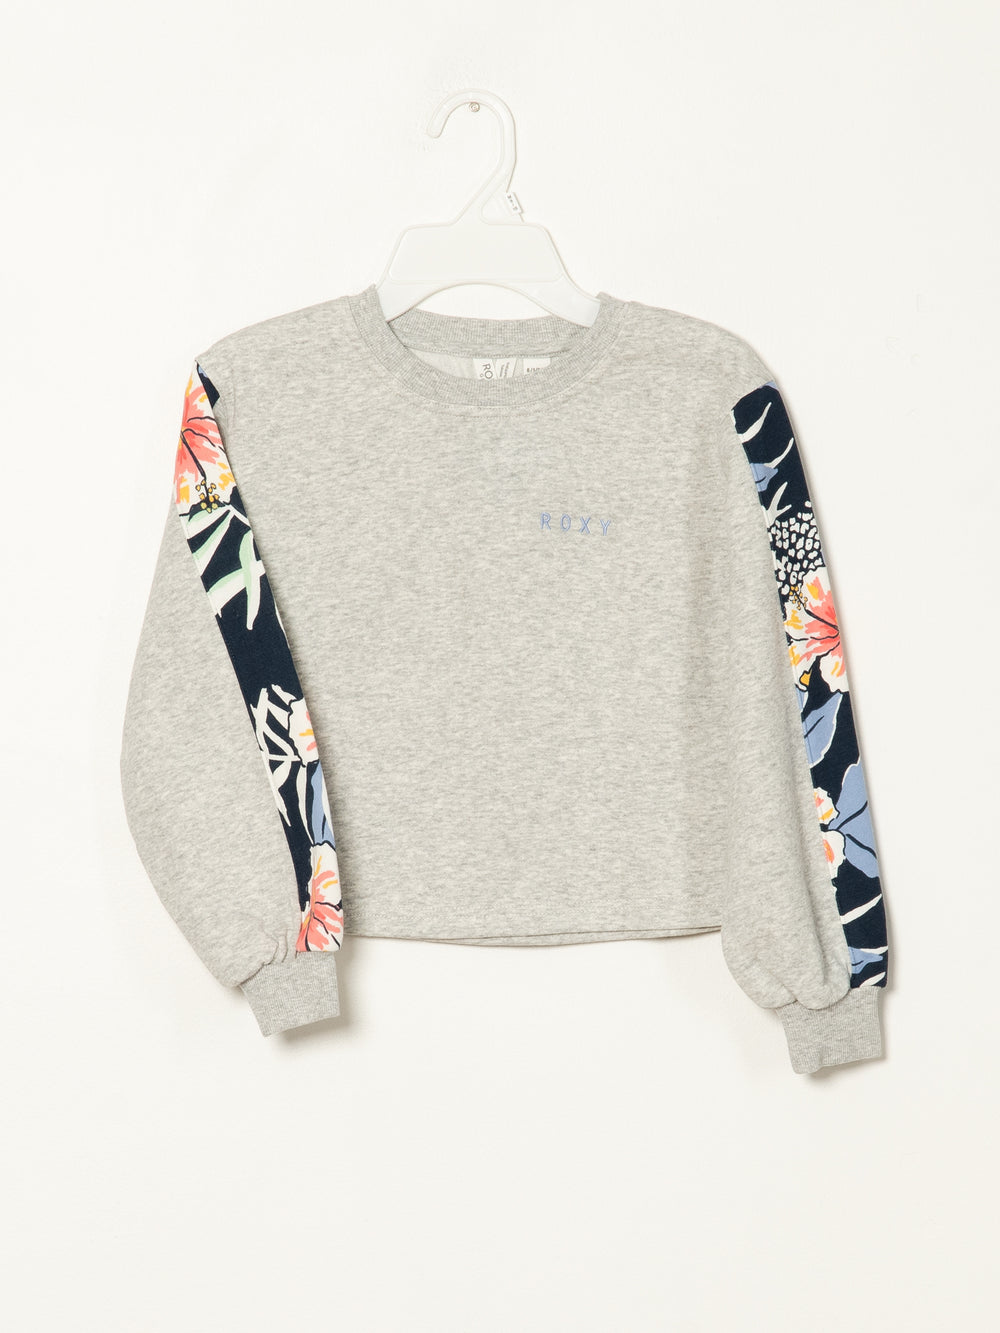 ROXY YOUTH GIRLS TELL YOUR FRIENDS CREWNECK - CLEARANCE